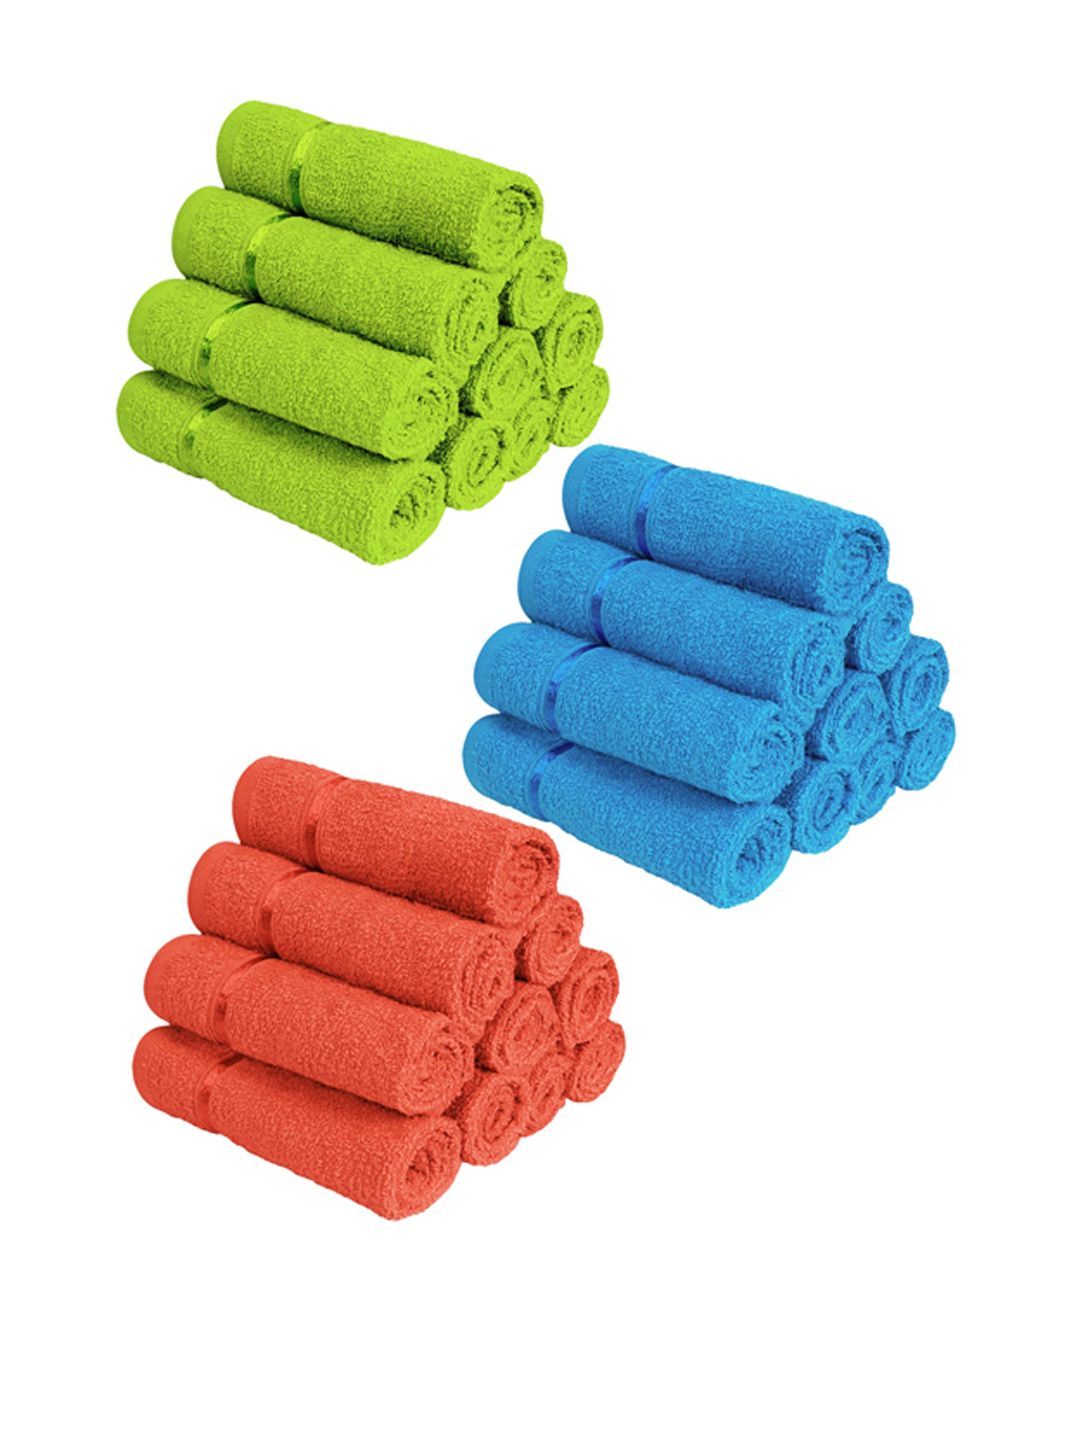 Story@home Set of 30 450 GSM Cotton Face Towels Price in India